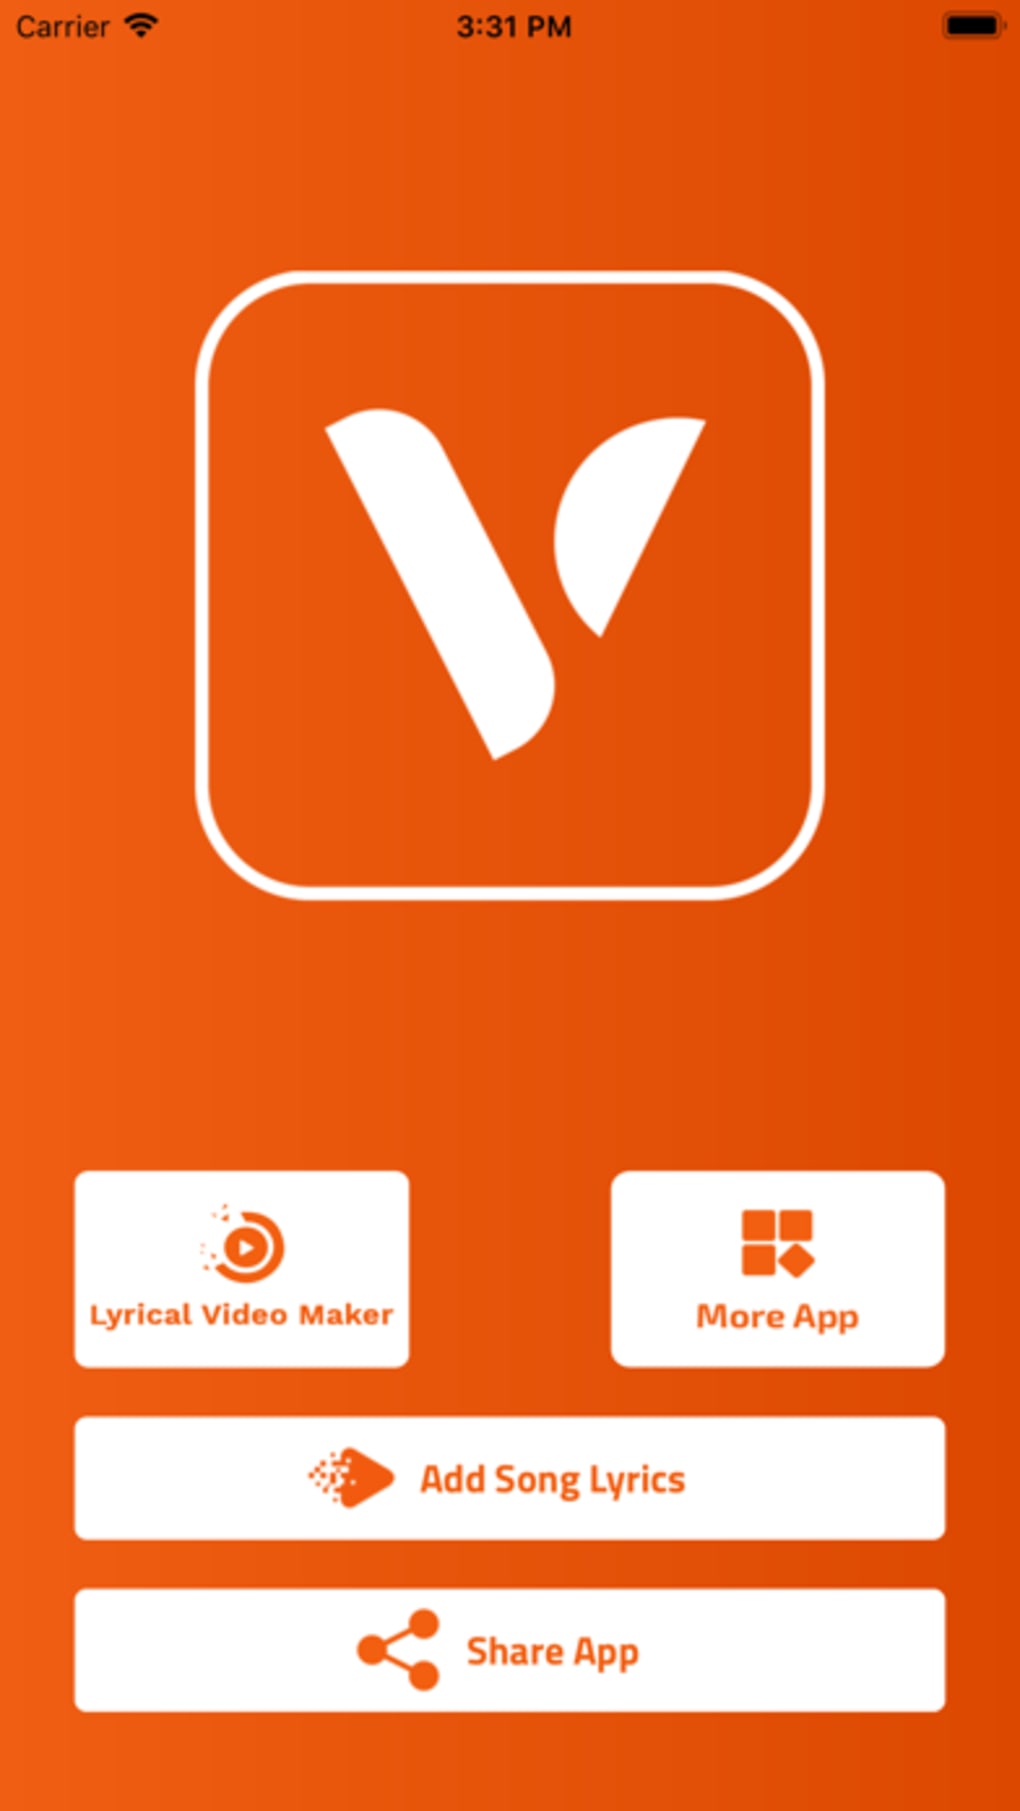 vidmate app for iphone download